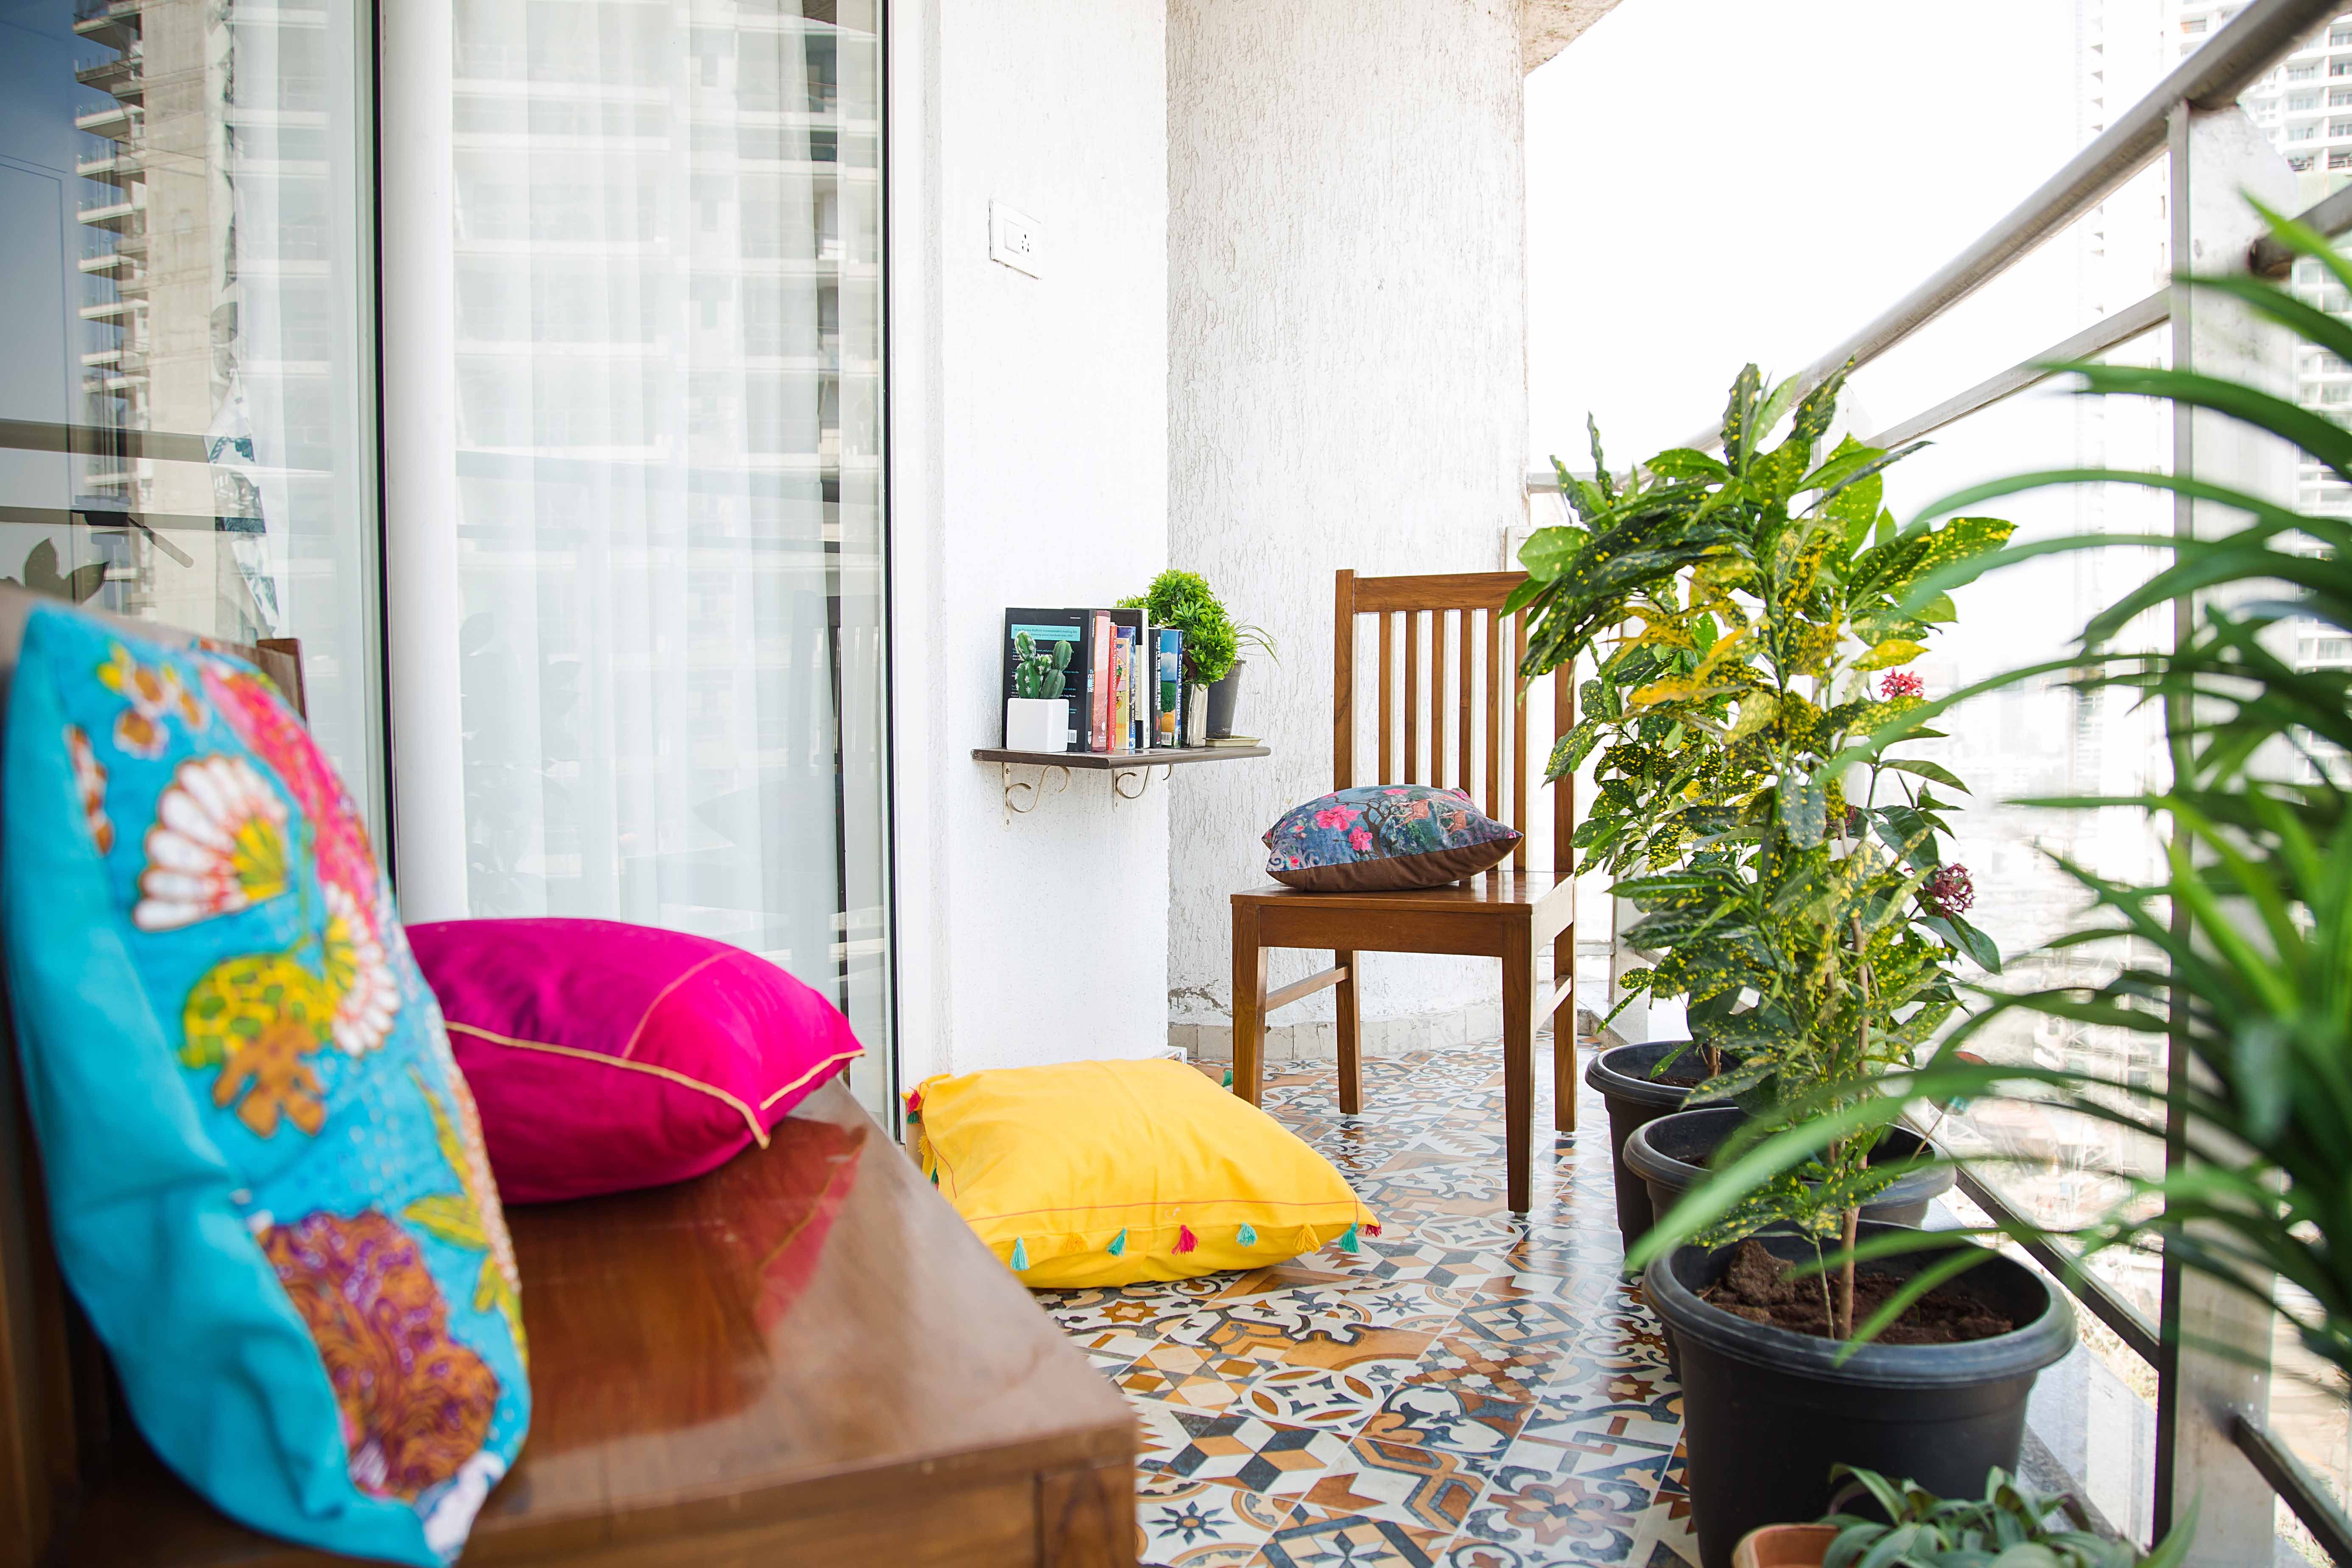 Eclectic Balcony Design with Textured Off-White Wall and Moroccan Floor Tiling